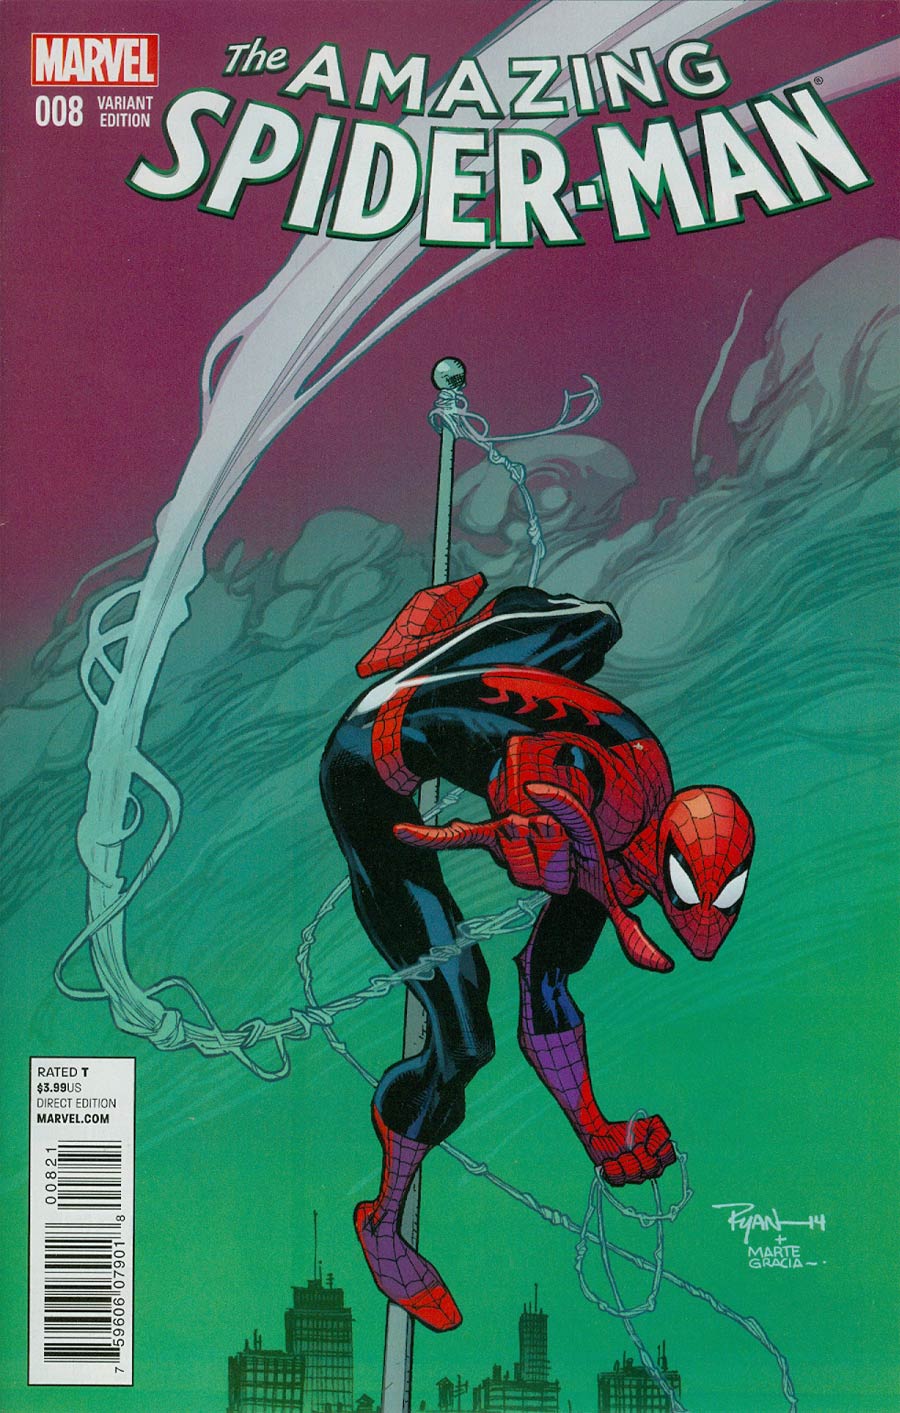 Amazing Spider-Man Vol 3 #8 Cover B Incentive Ryan Ottley Variant Cover (Edge Of Spider-Verse Tie-In)